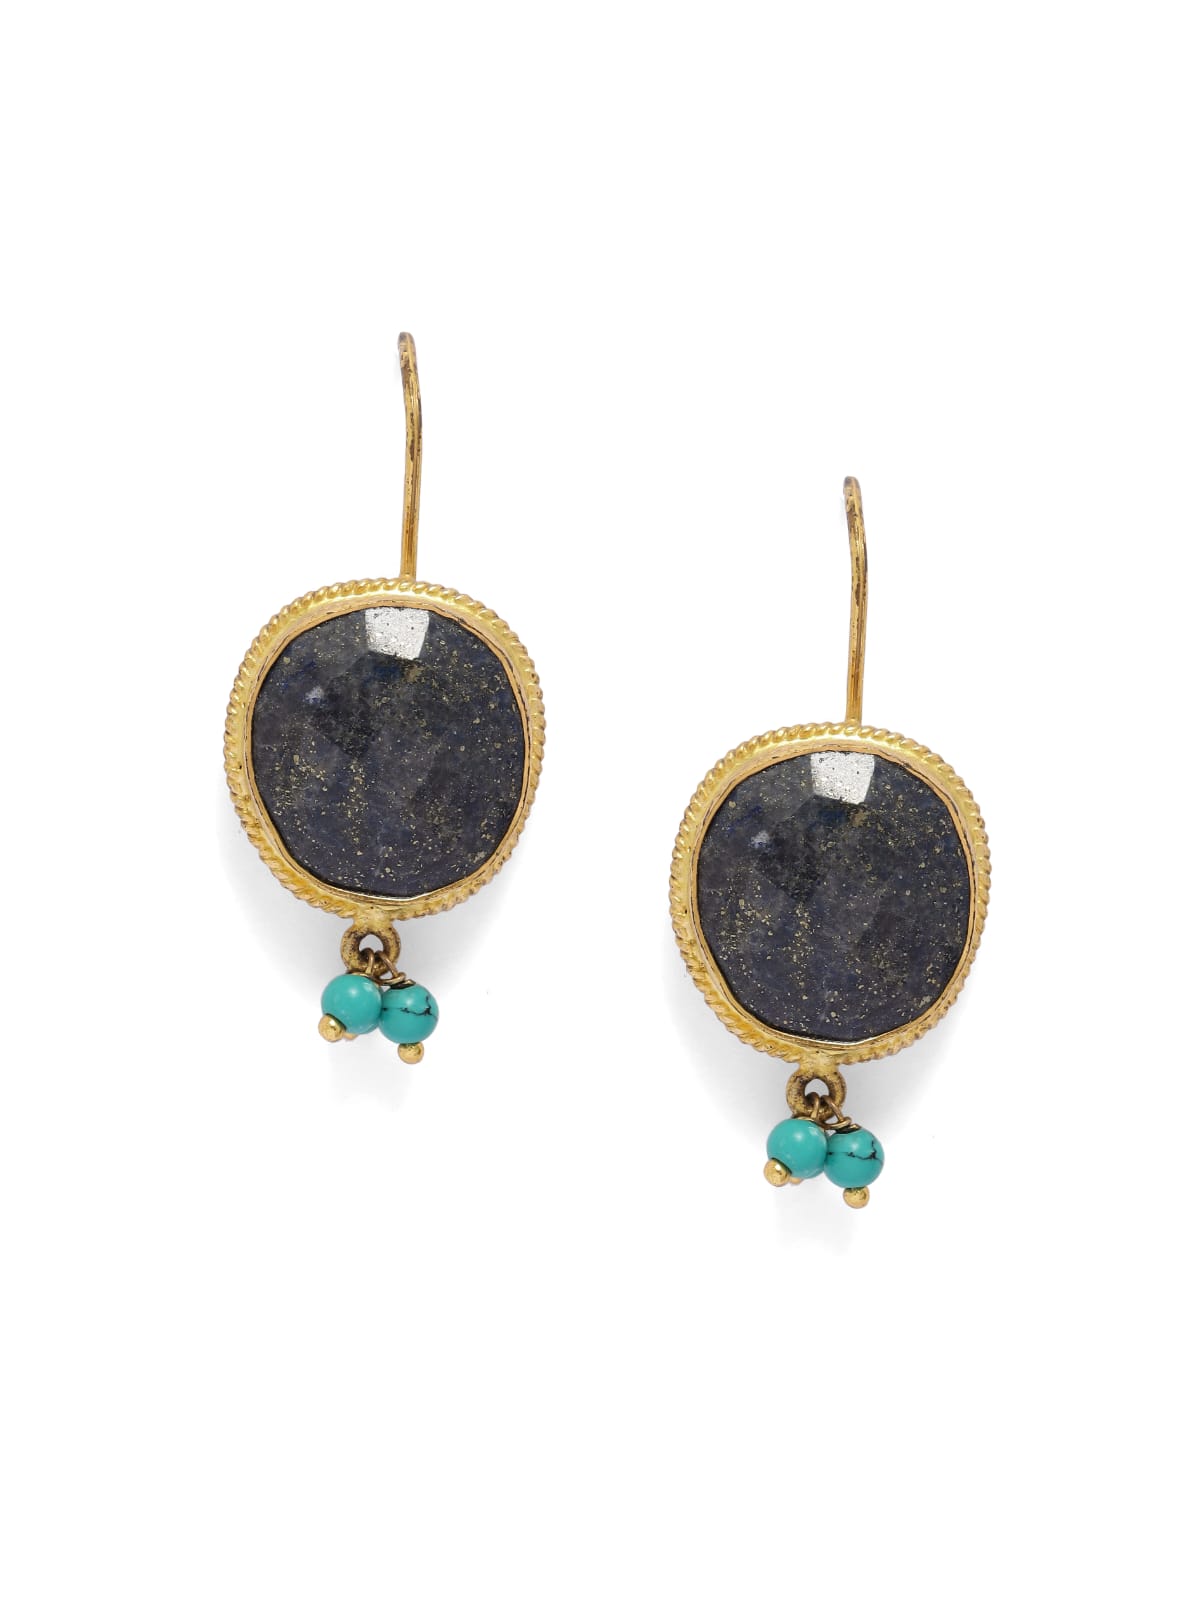 92.5 sterling Silver Gold plated with Lapis Lazuli and Turquoise earrings.